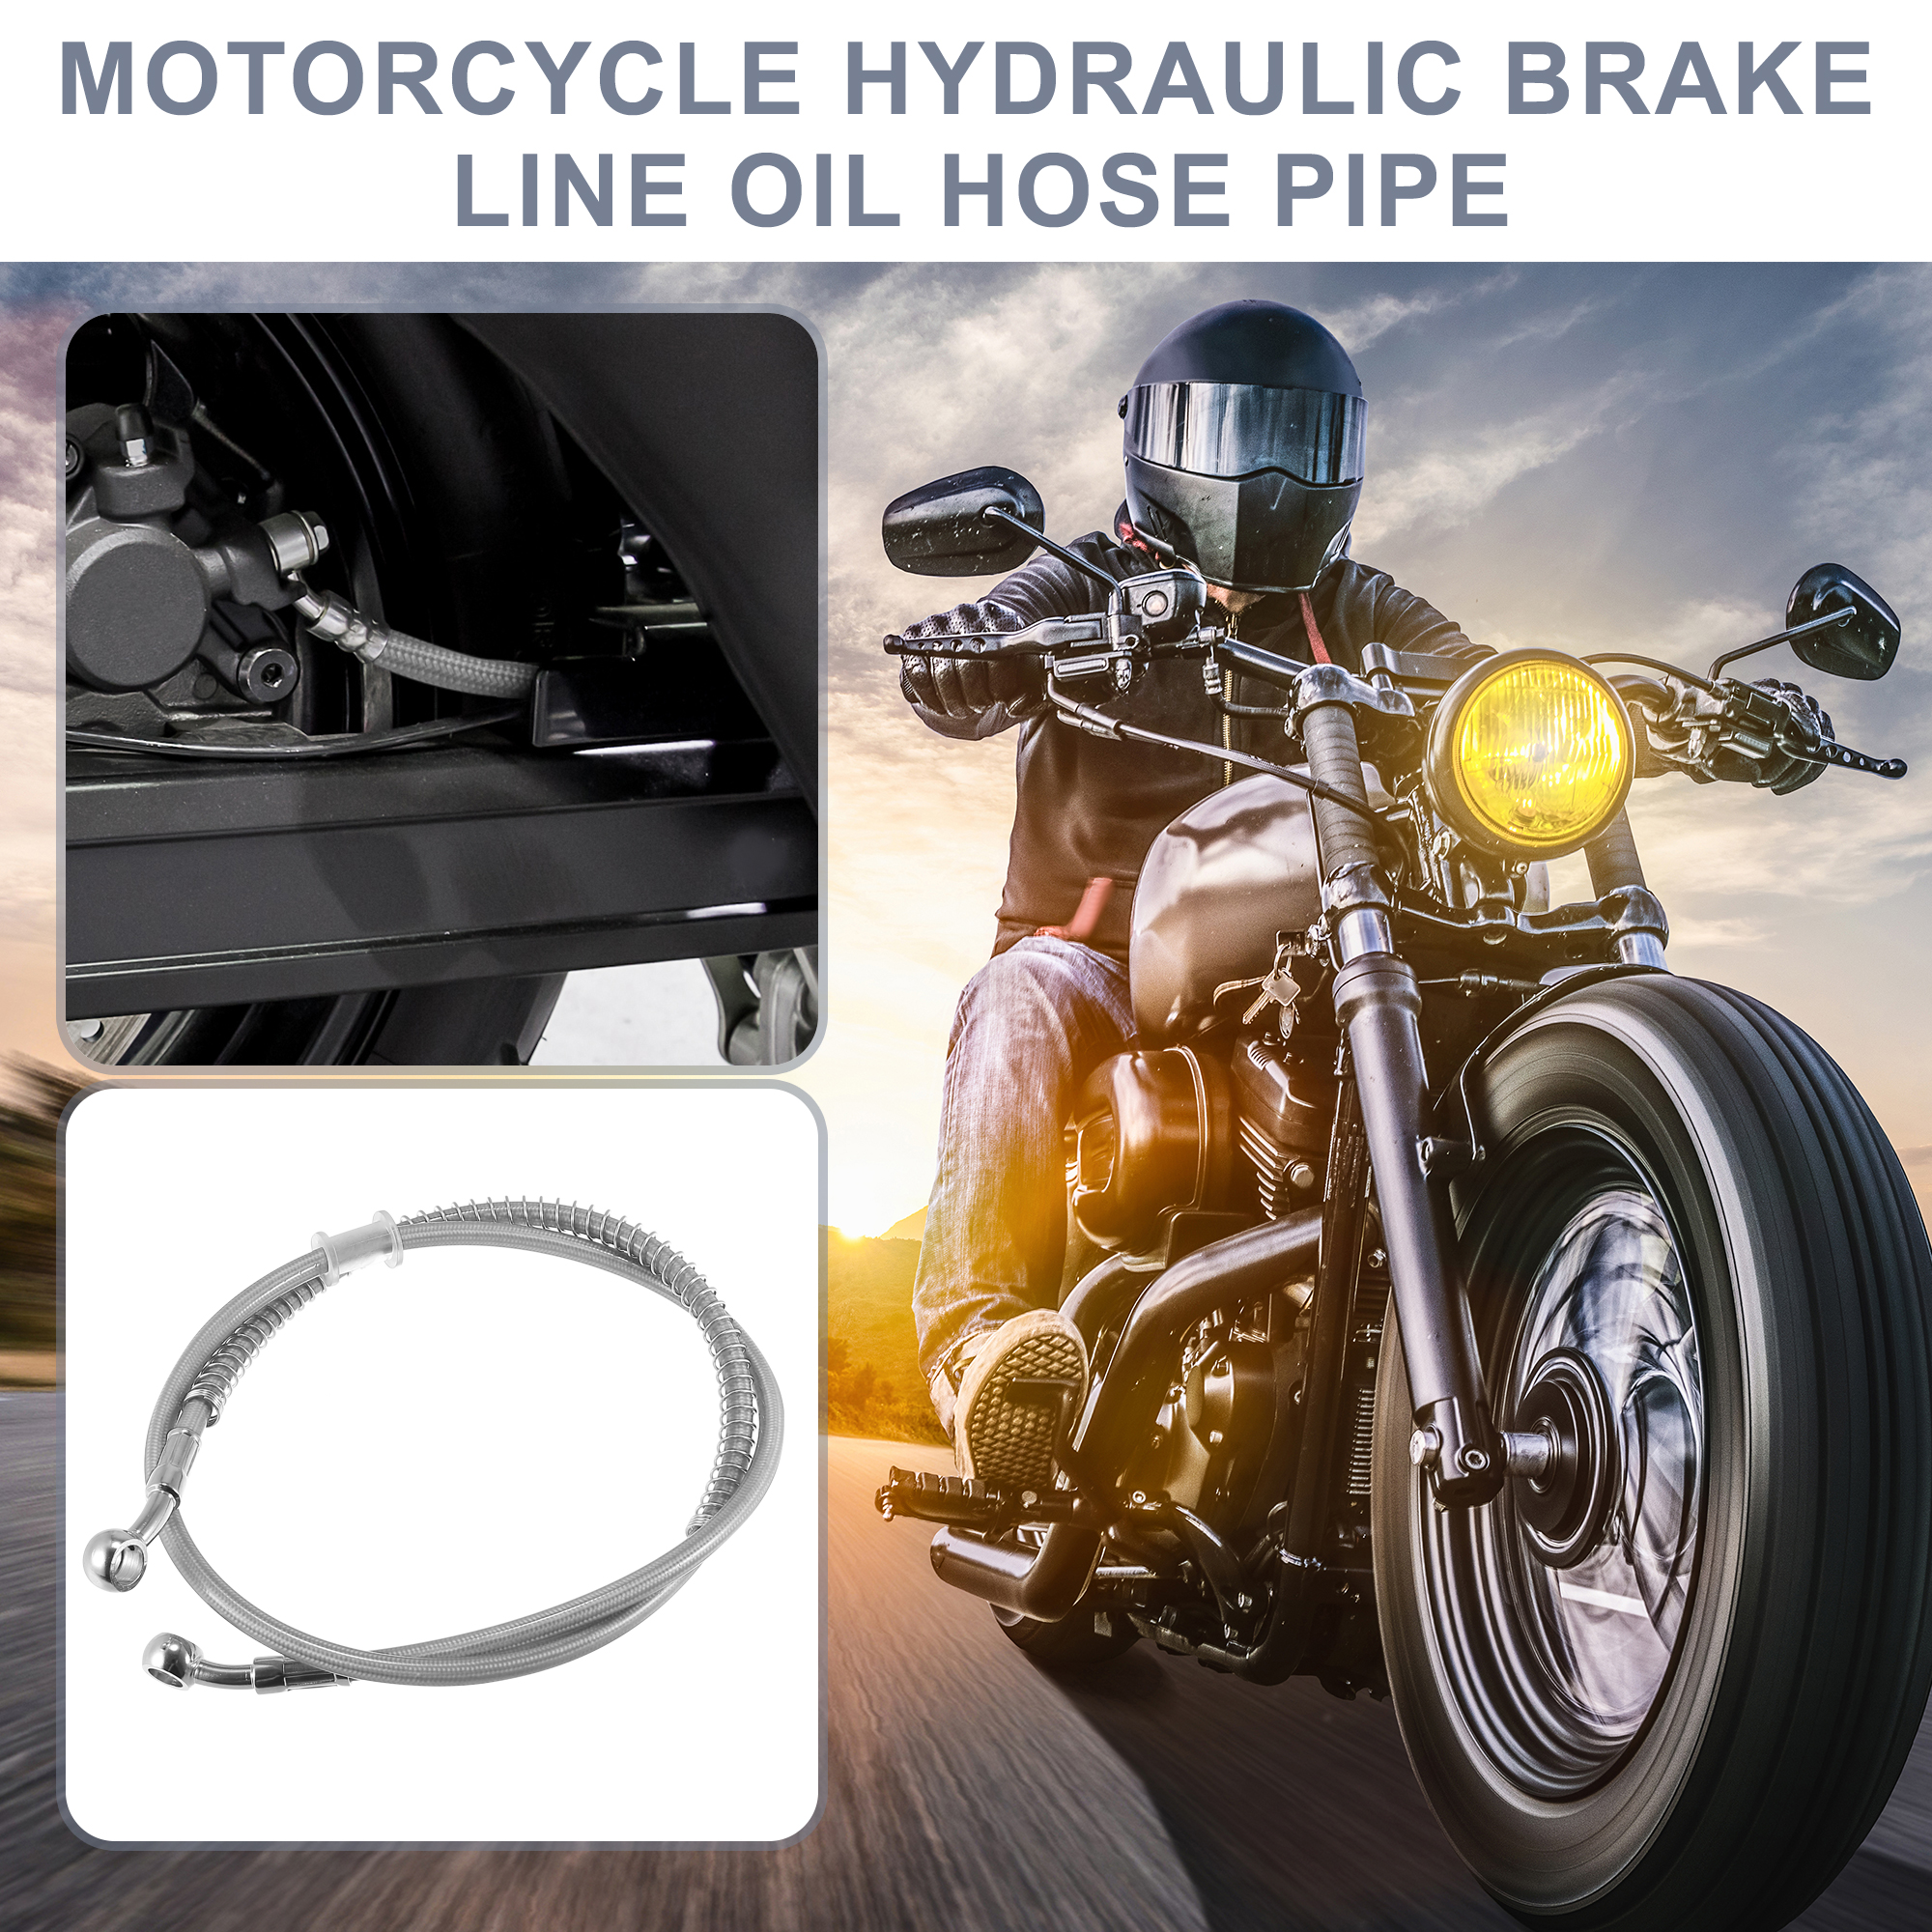 Unique Bargains 39.37" 10mm Motorcycle Hydraulic Brake Line Oil Hose Stainless Steel Silver Tone